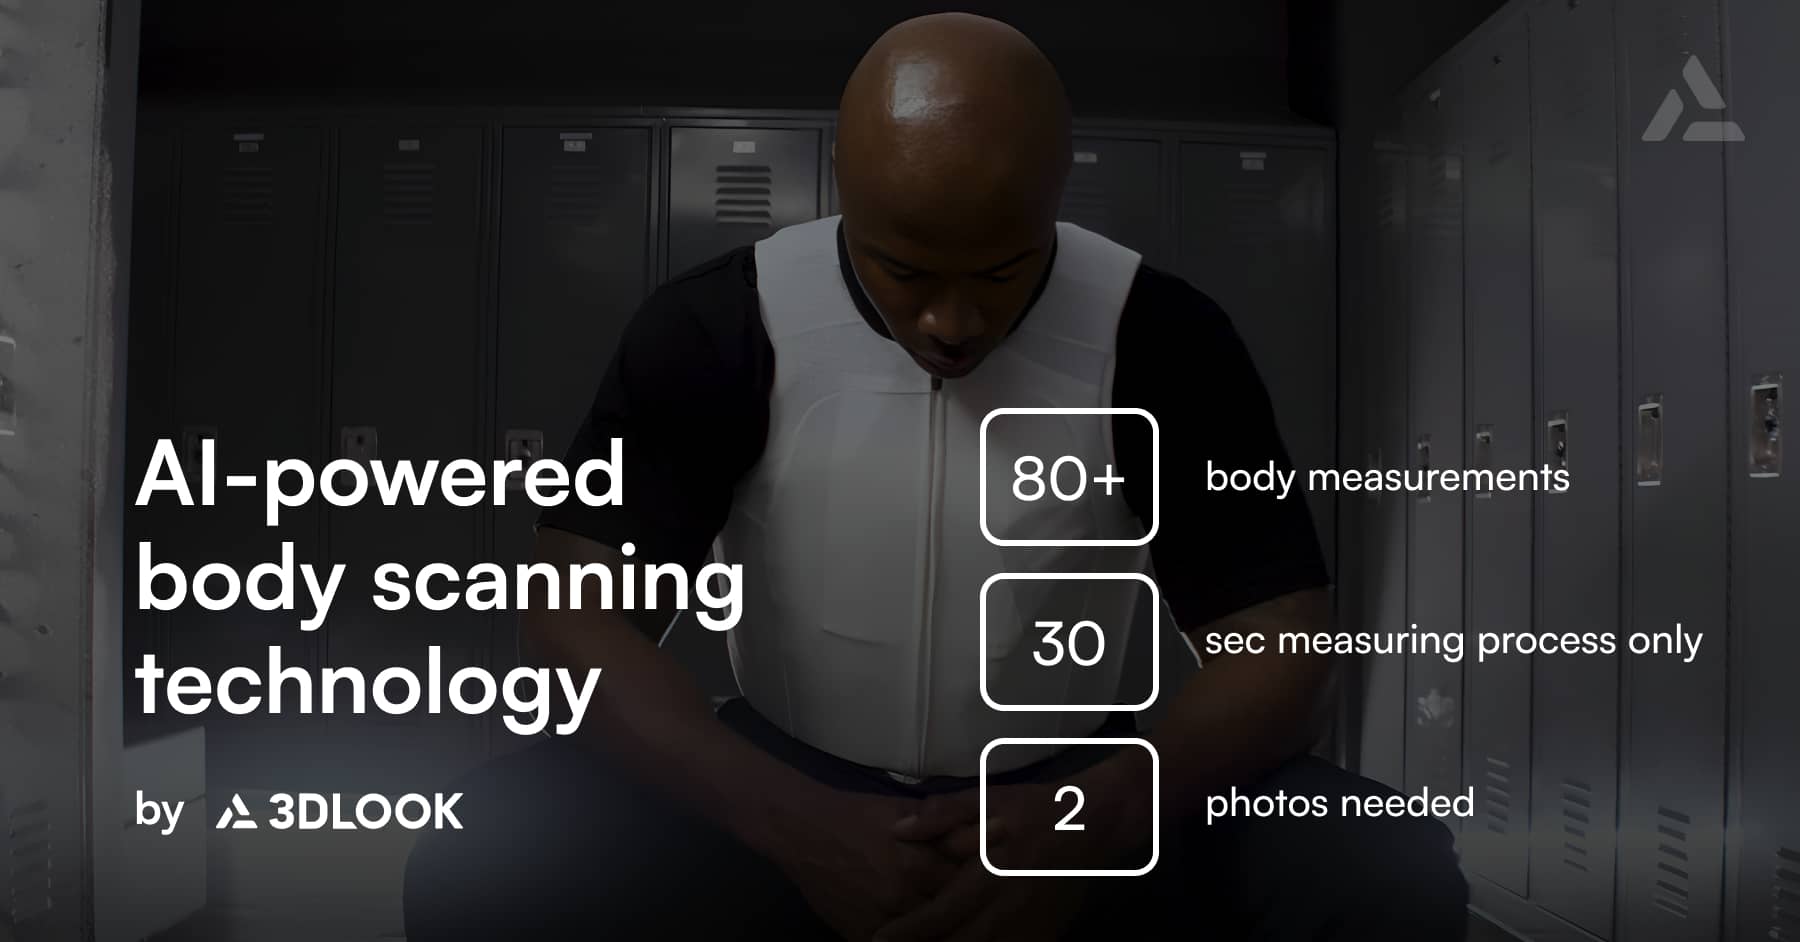 A man using a locker room is being illustrated to explain the concept of AI-powered mobile body scanning technology, developed by the Safariland Group, that requires only two photos to measure over 80 body